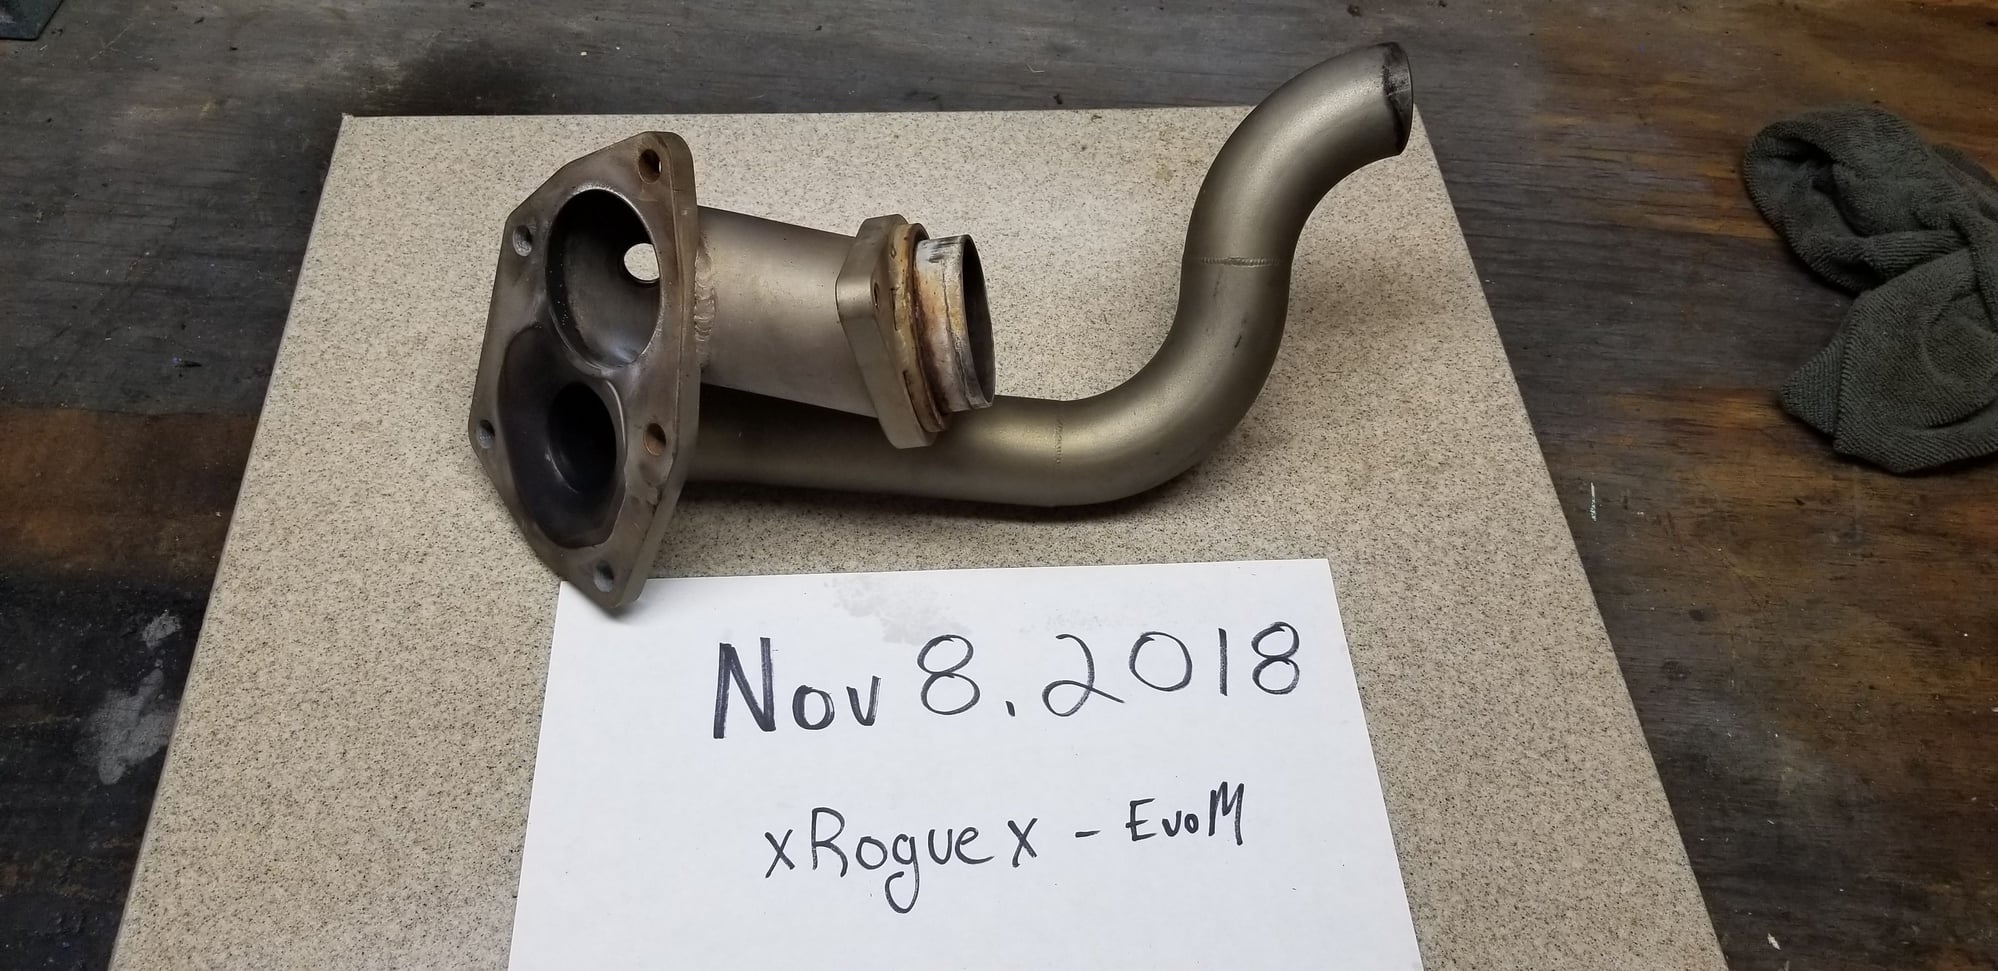 Engine - Internals - Evo8/9 - Manley Turbo Tuff, BF272s, FP SS O2, 4g64 block, BR Downpipe, MAP 02, etc. - Used - Harwick, PA 15049, United States